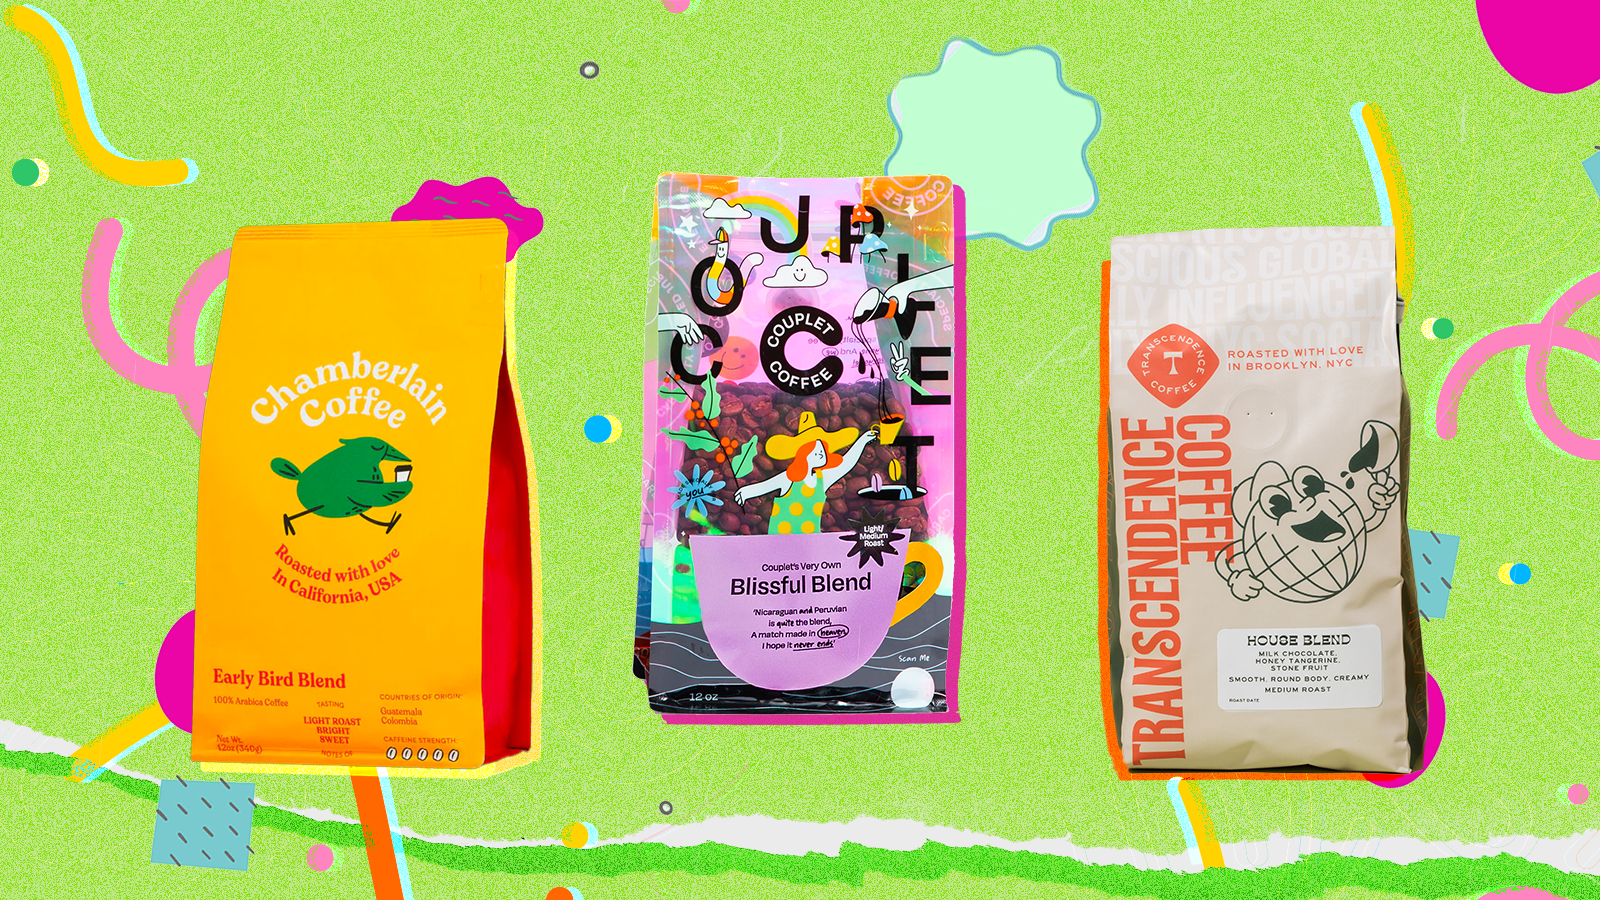 three bags of coffee from the brands Chamberlain Coffee, Couplet, and Transcendence, cut out and placed in front of a bright green background with colorful blobs and shapes